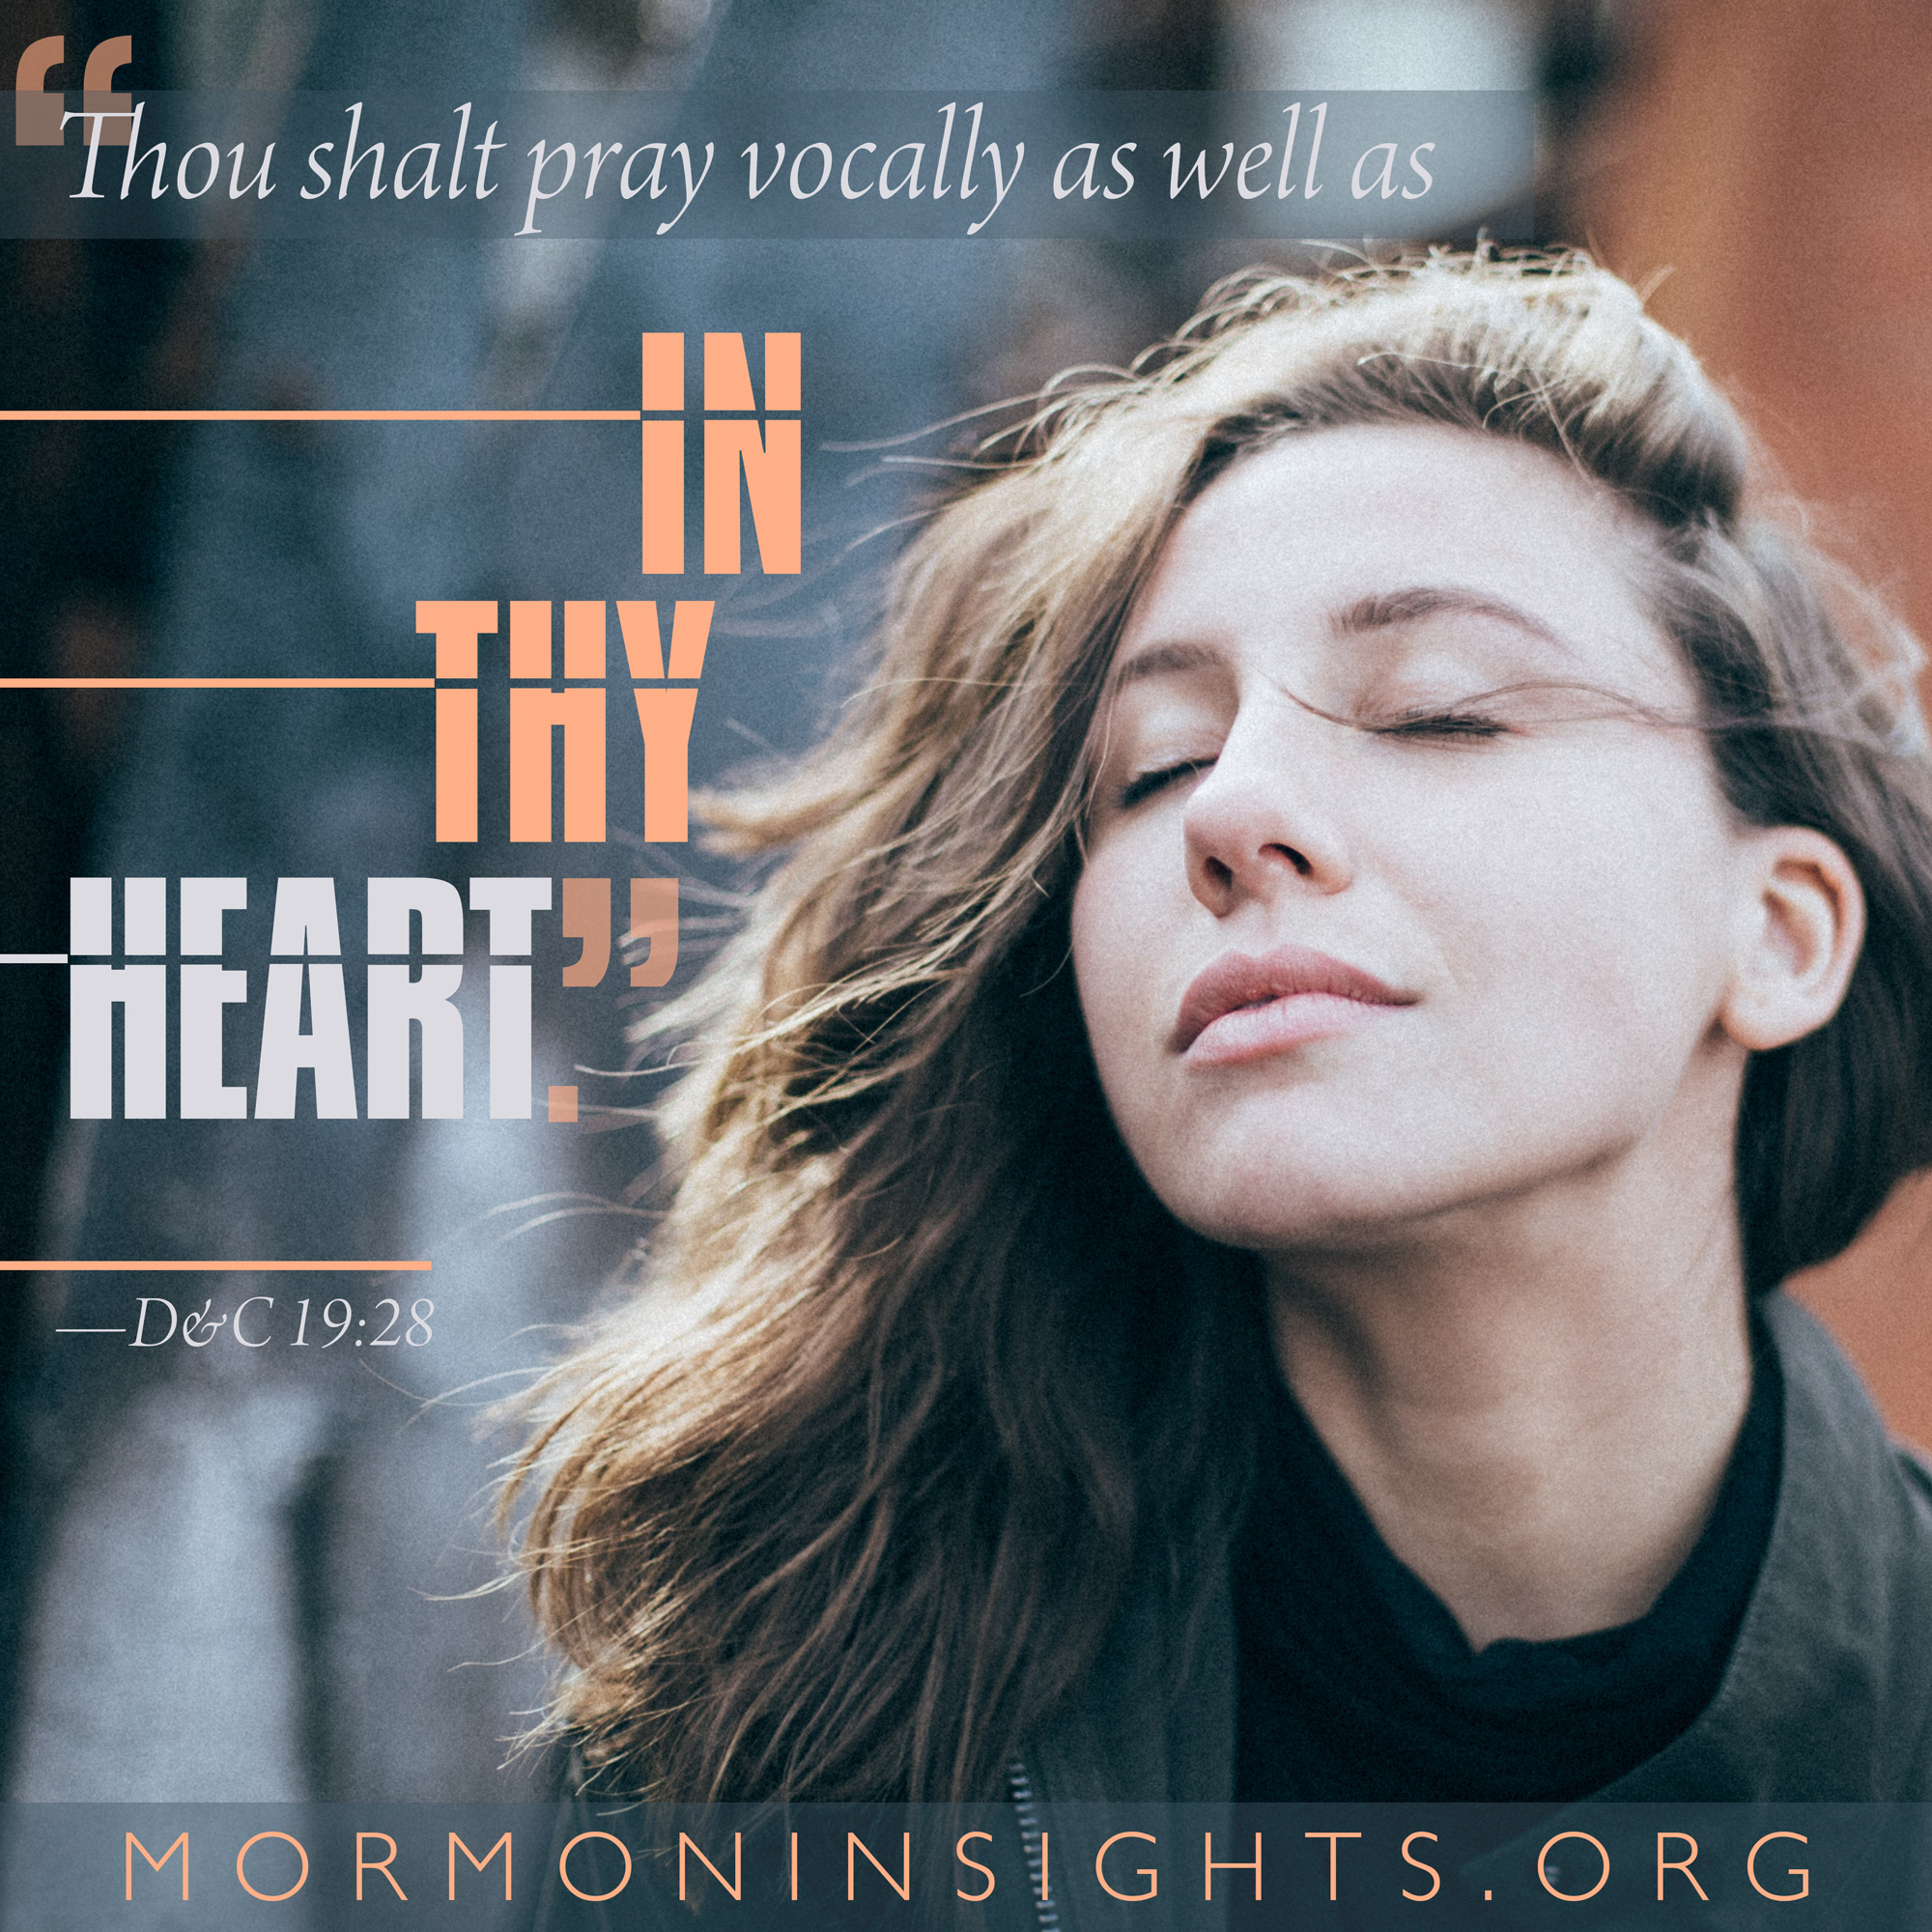 "Thou shalt pray vocally as well as in thy heart." -D&C 19:28